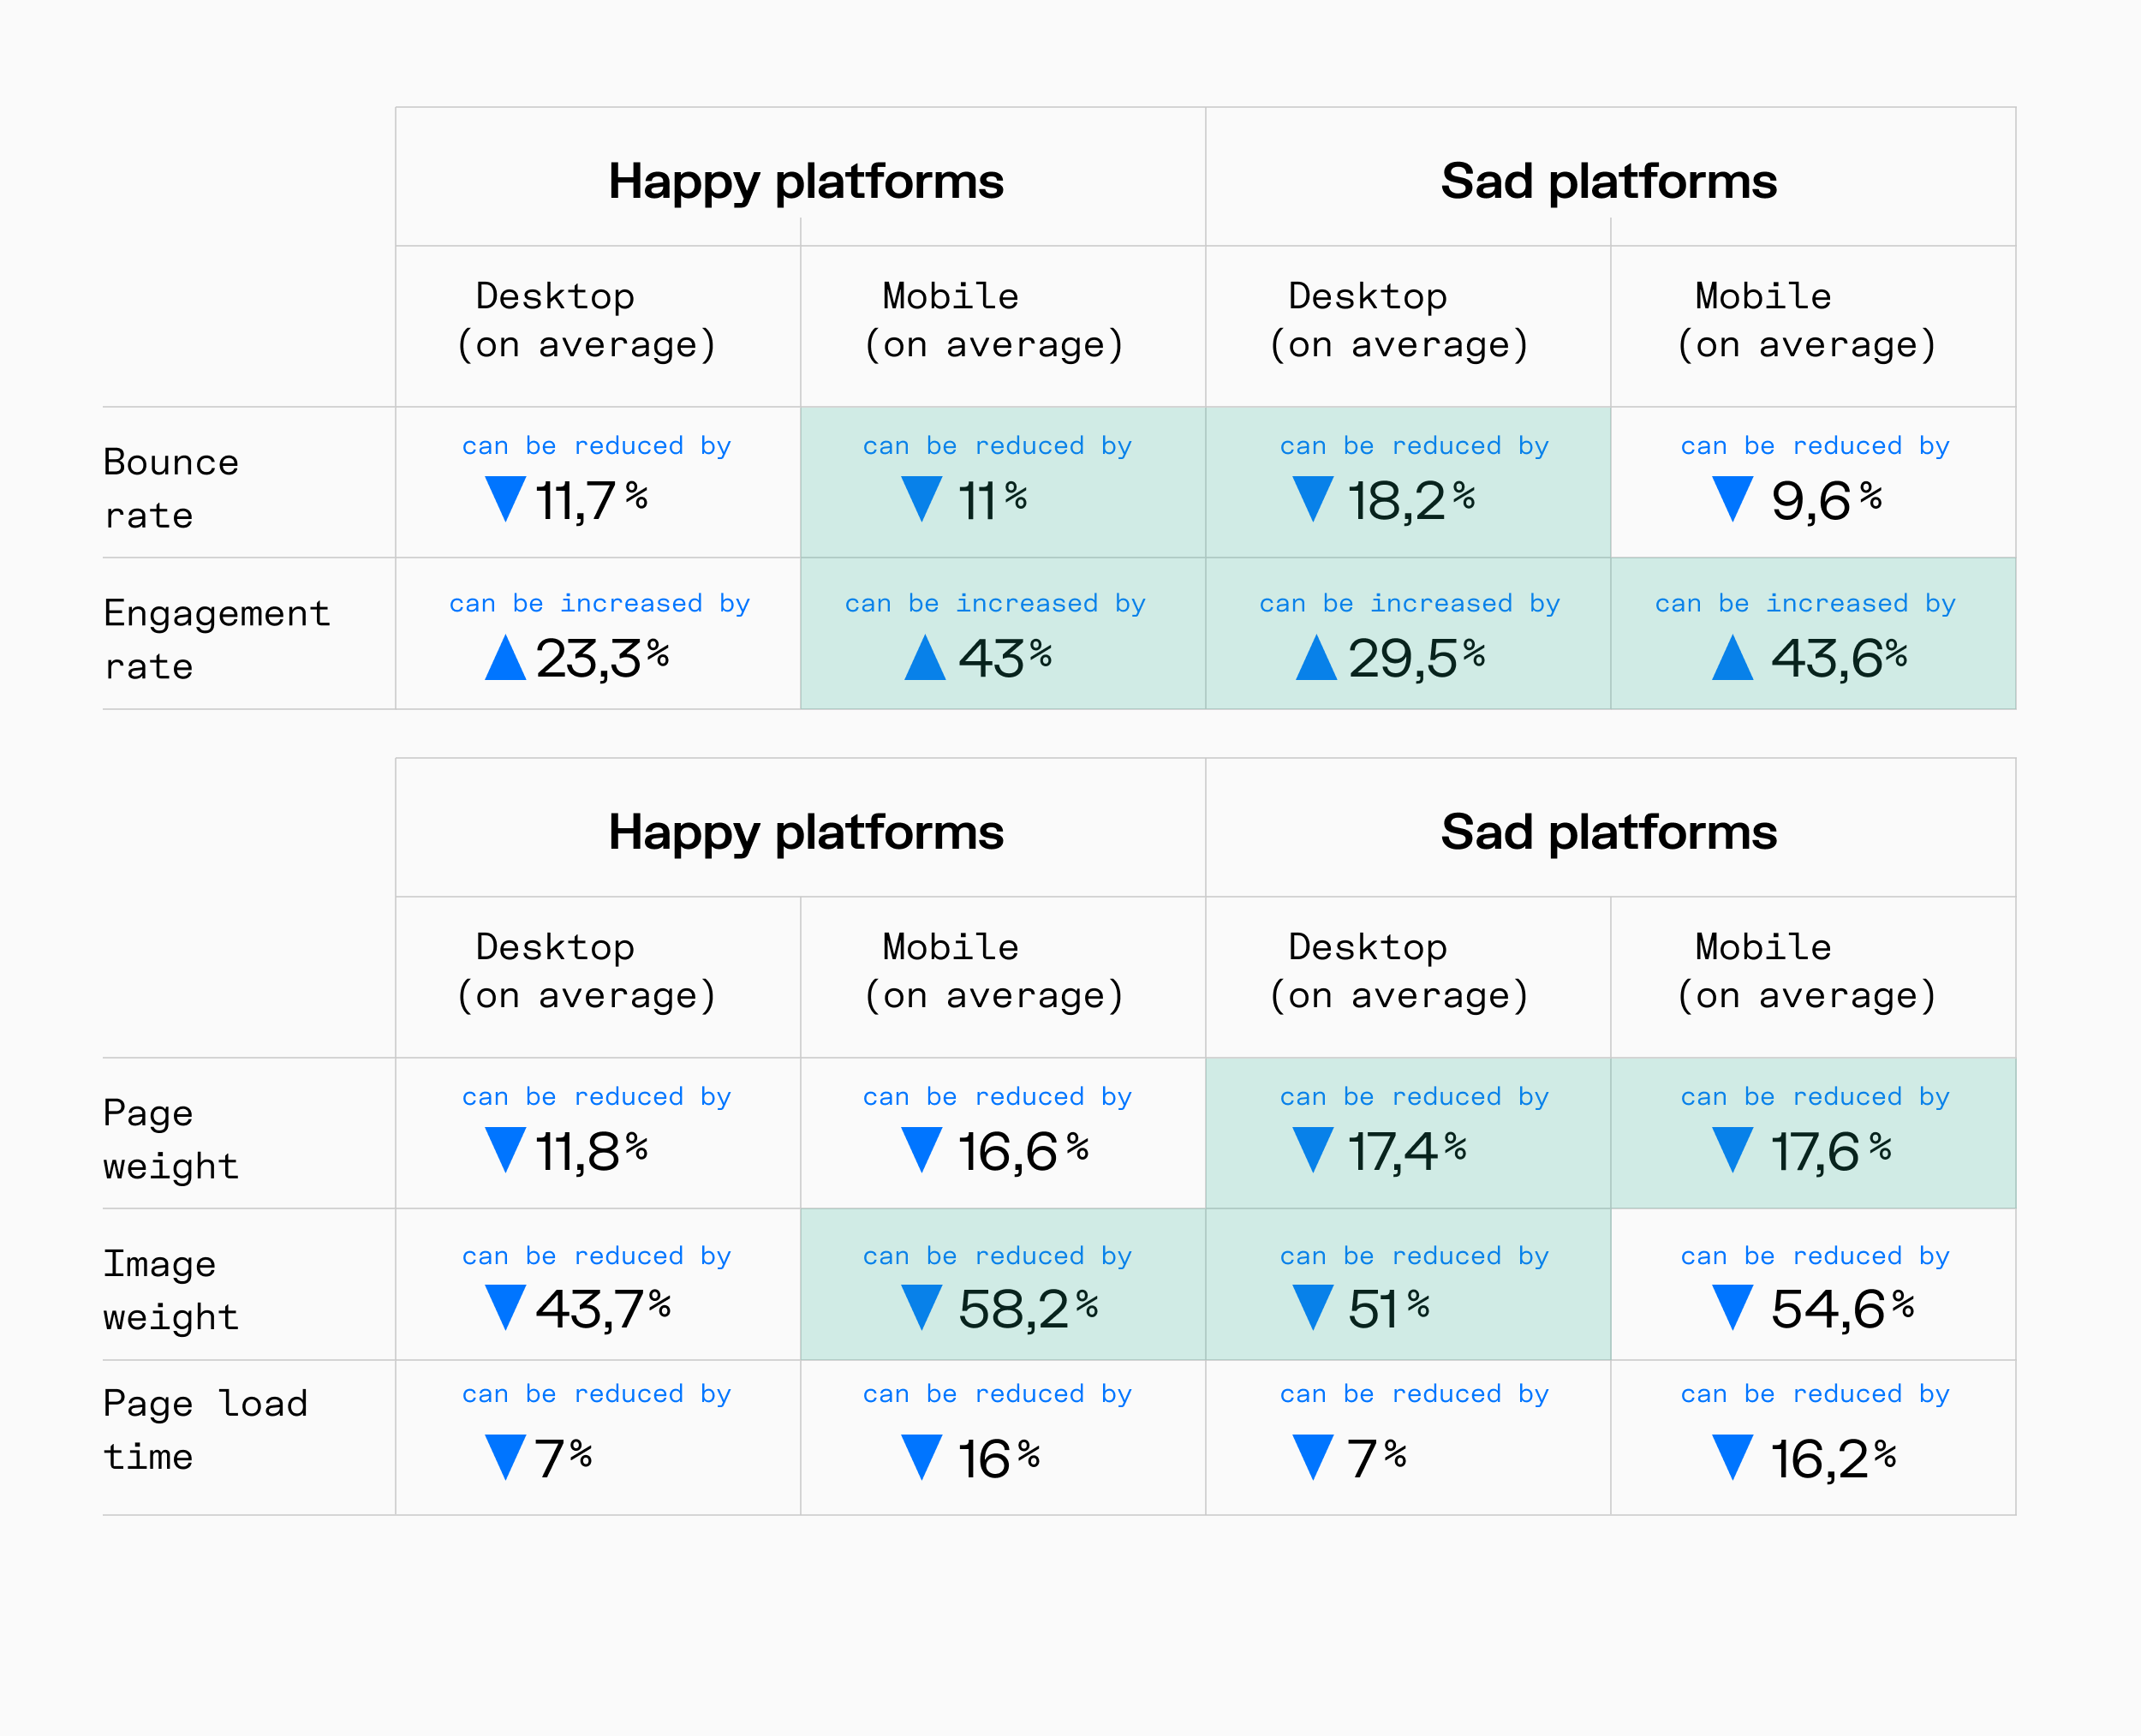 Web performance ratings for both types of platform compared